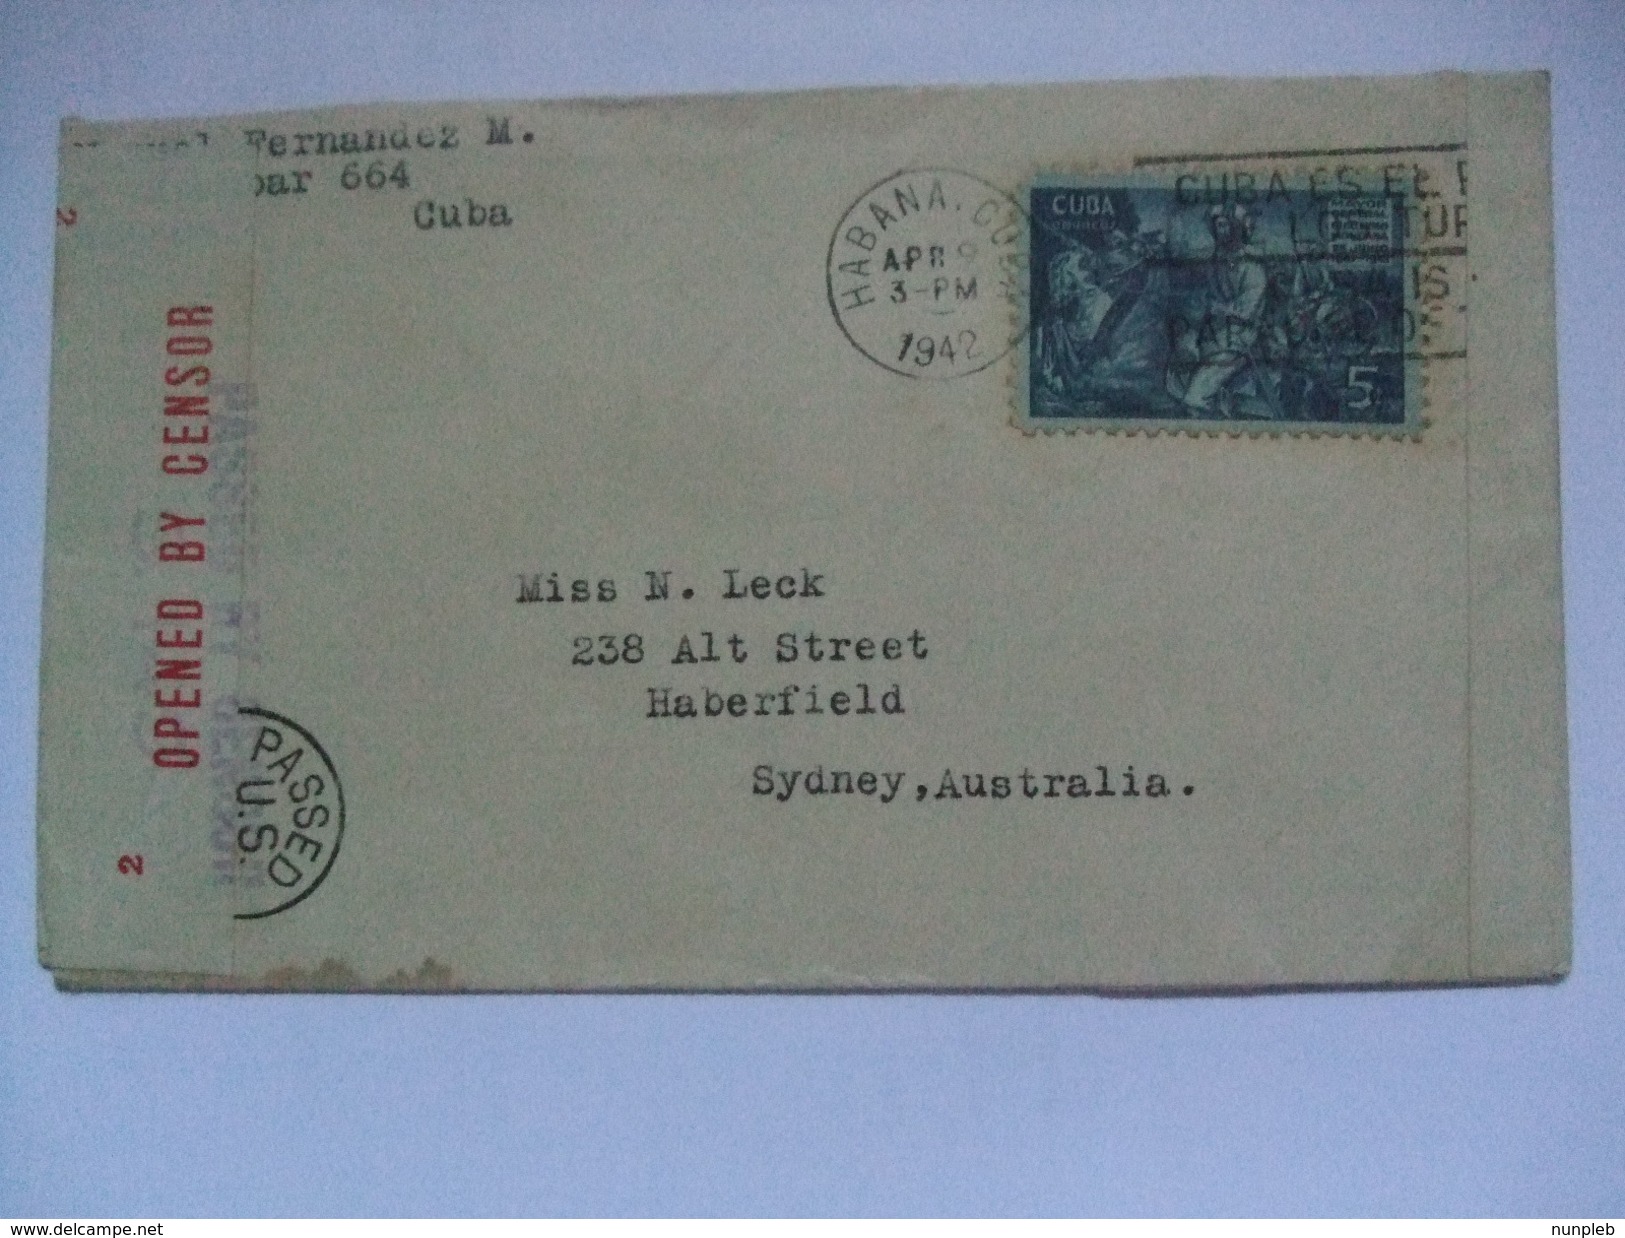 CUBA 1942 Censor Cover Habana To Sydney Australia With Opened, Examined And Passed Censor Marks - Covers & Documents